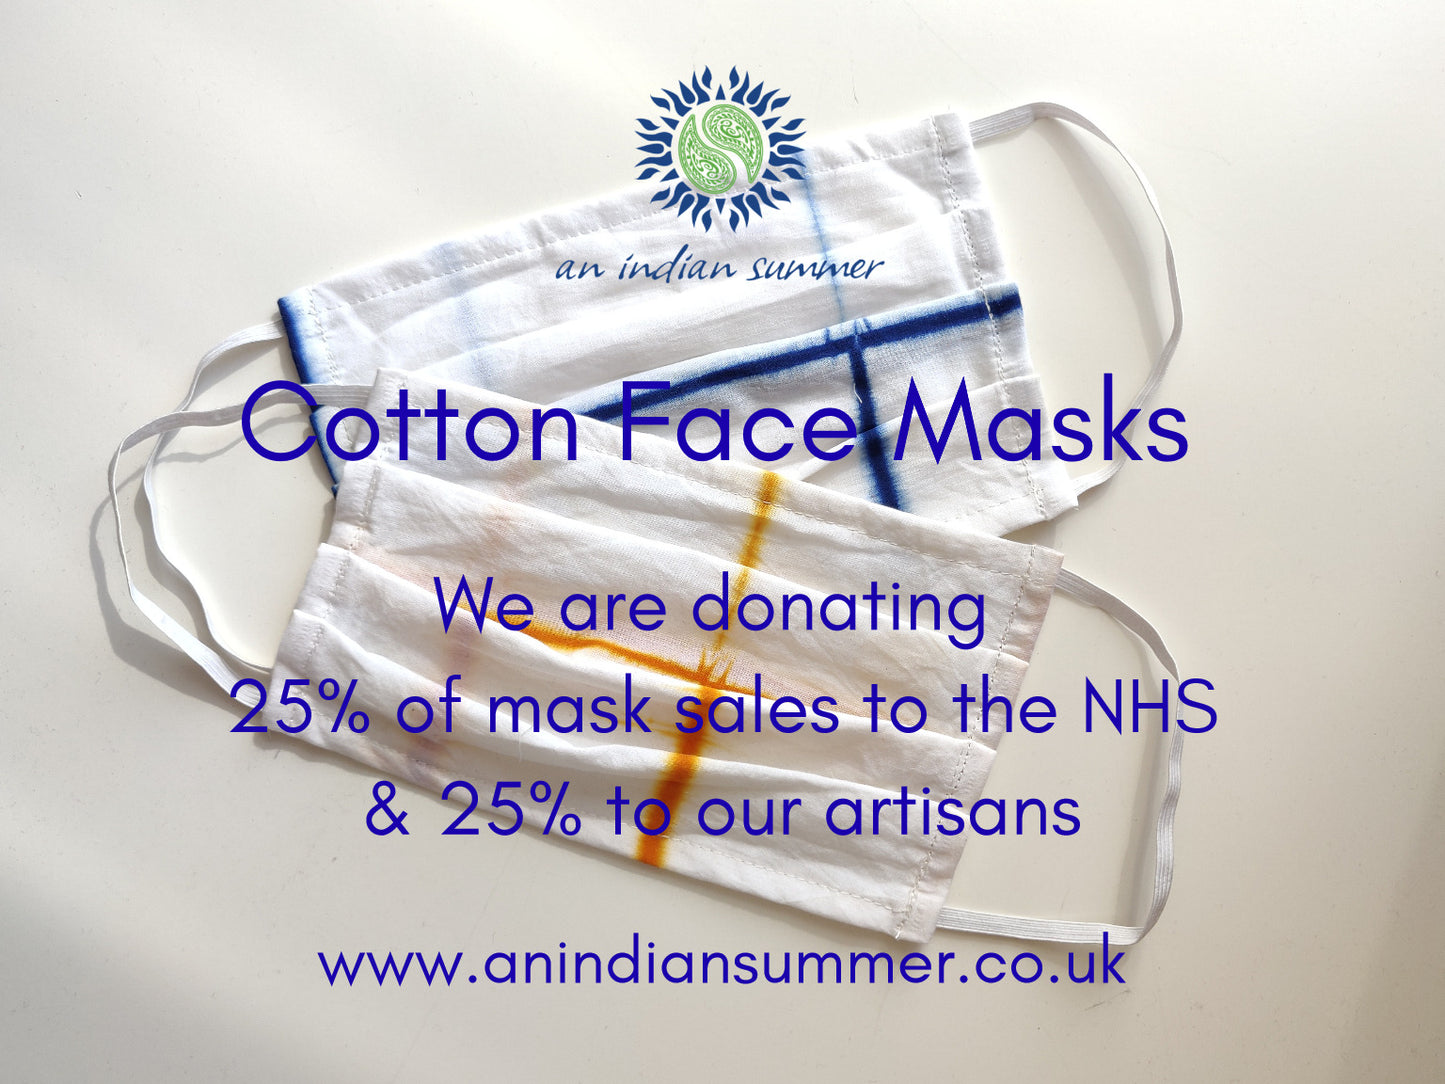 Cotton Face Mask | Handmade | Sustainable Hand Block Printed & Shibori Tie Dye | Cotton | An Indian Summer | Donations to the NHS & Artisans | Handmade | Sustainable & Sustainably Made